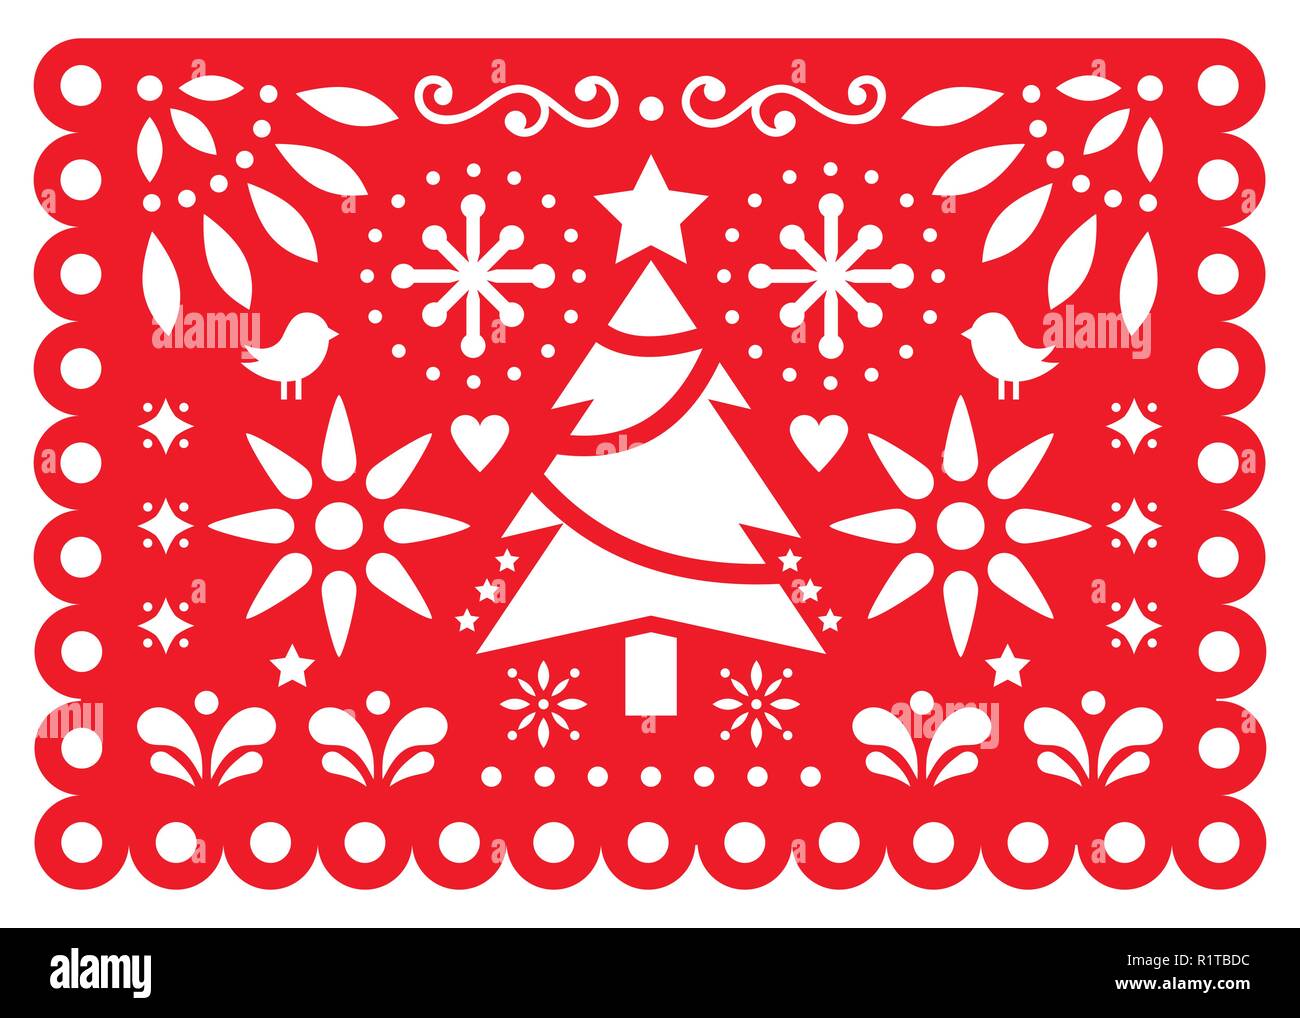 Christmas Papel Picado vector design, Mexican Xmas paper decorations, red and white 5x7 greeting card pattern Stock Vector